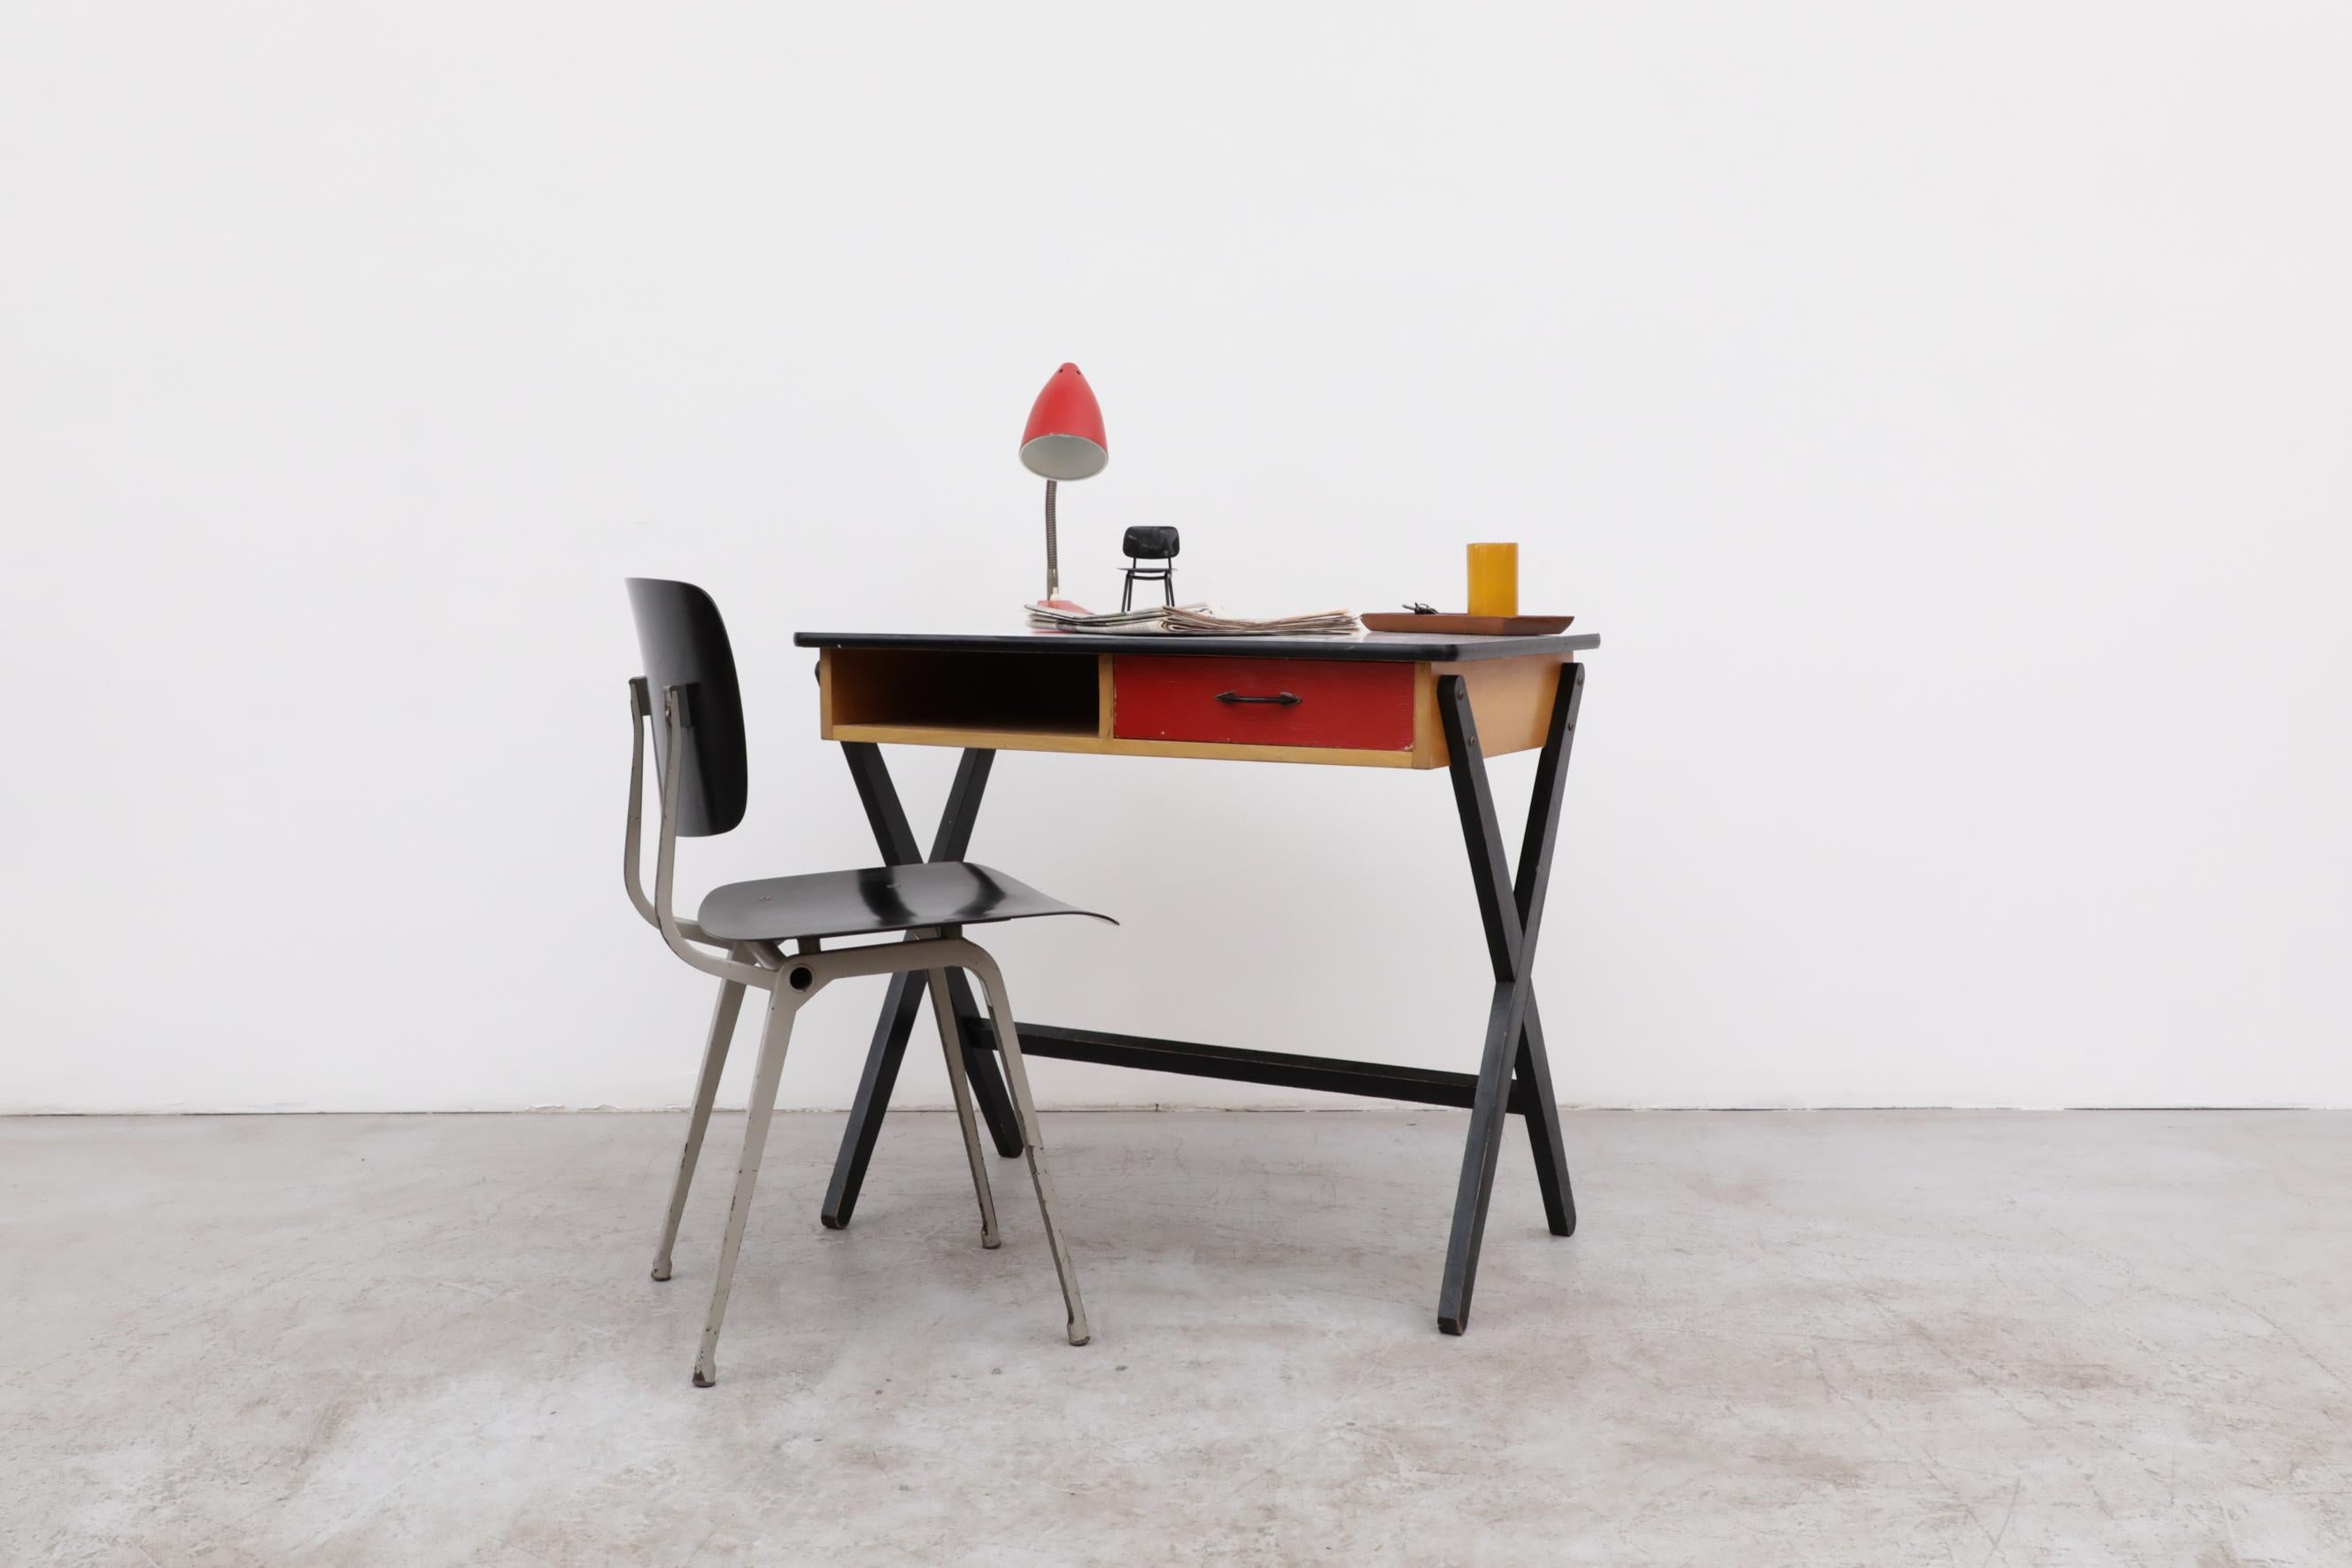 Mid-Century Modern 1954 Coen de Vries Desk in Birch w/ Ebony Base, Red Drawer and Formica Top For Sale